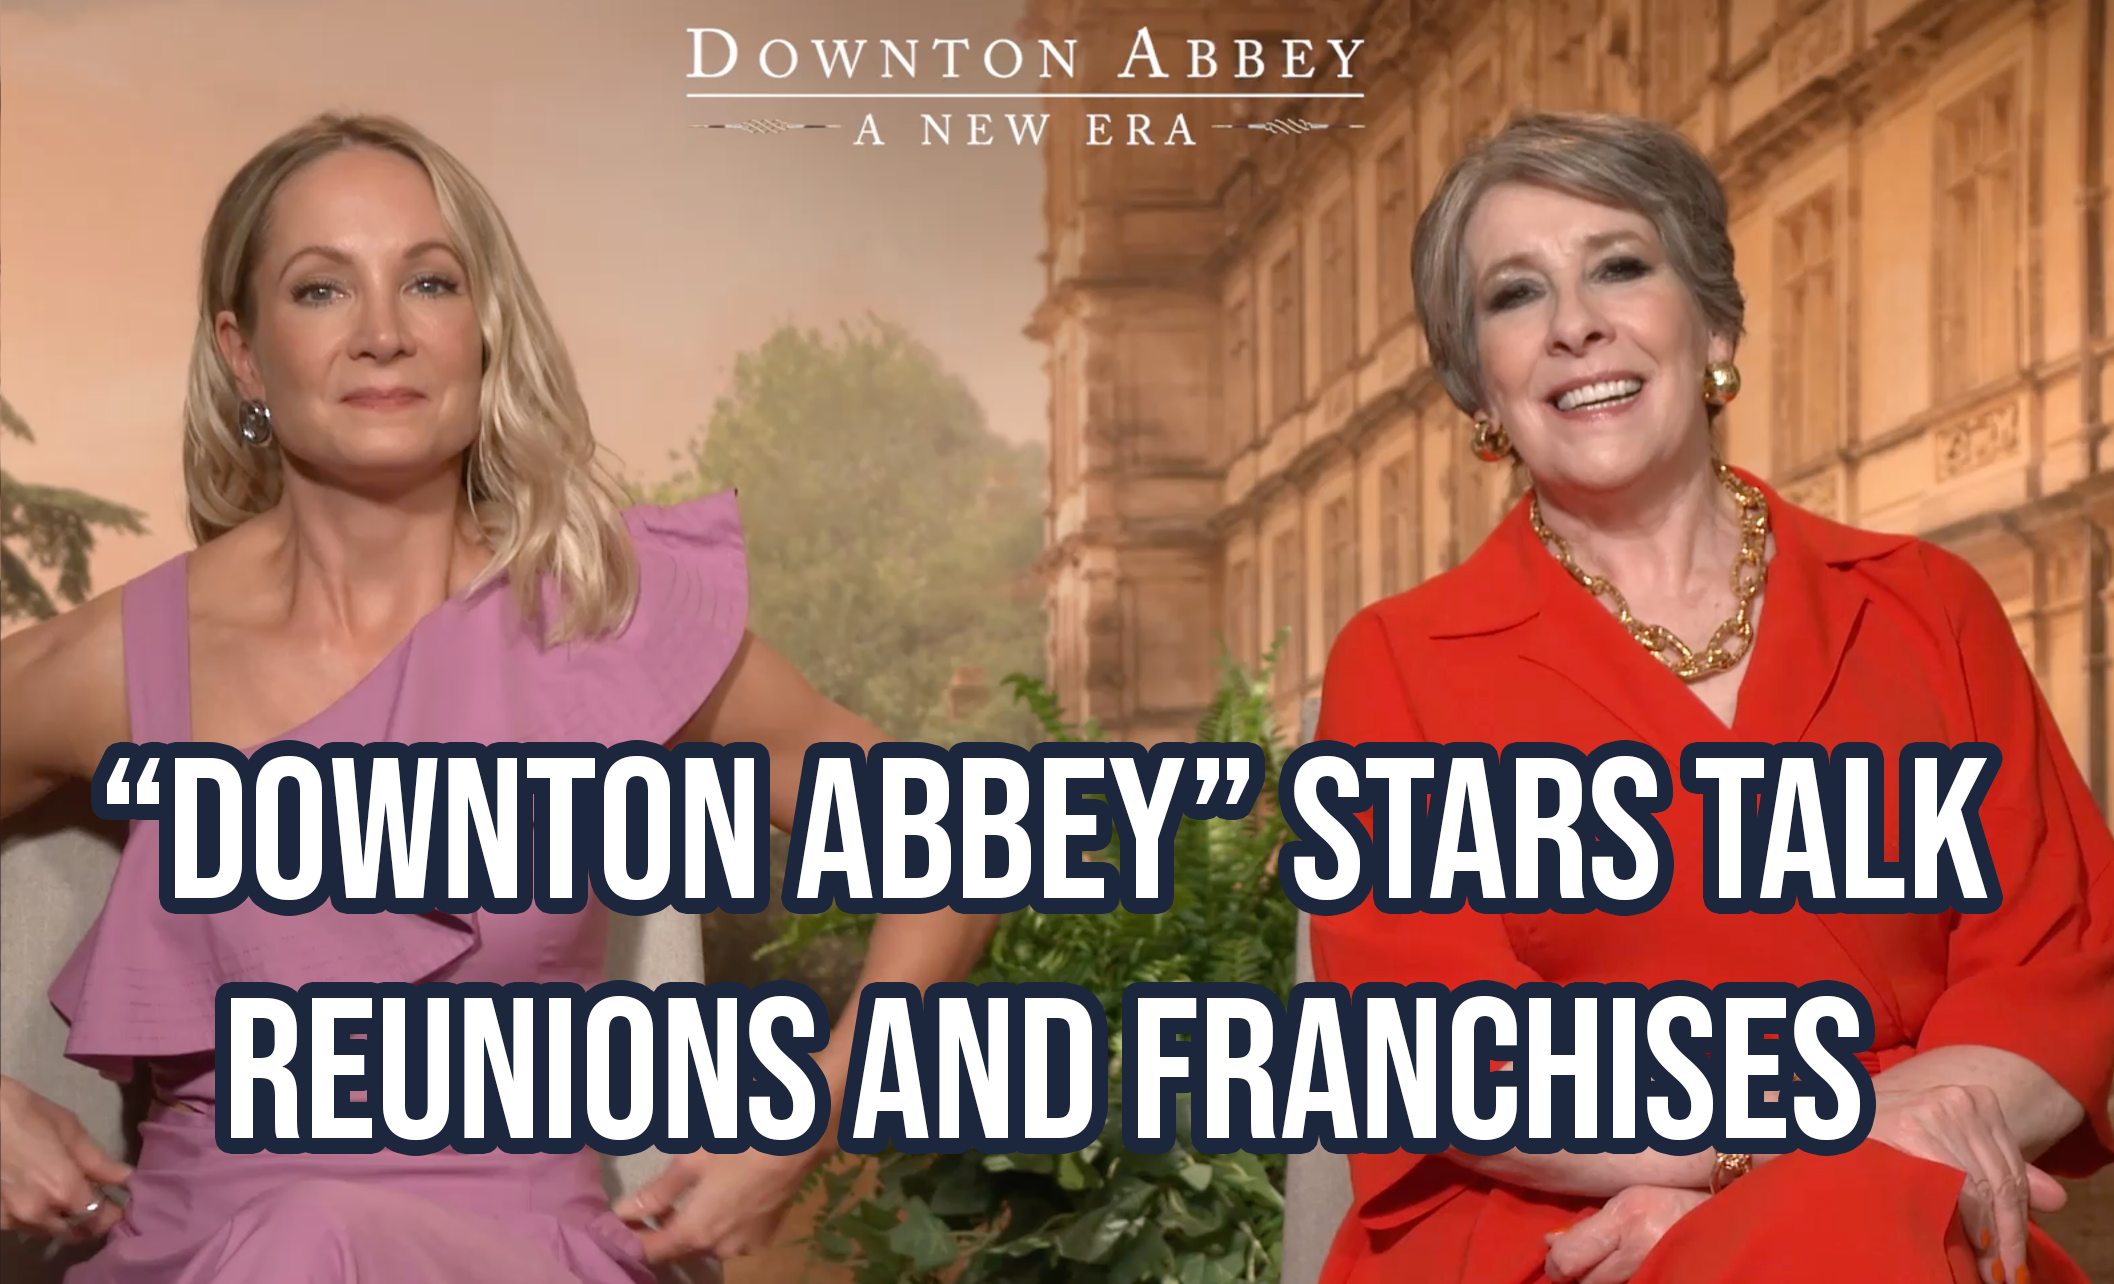 Downton Abbey stars talk reunions and franchises